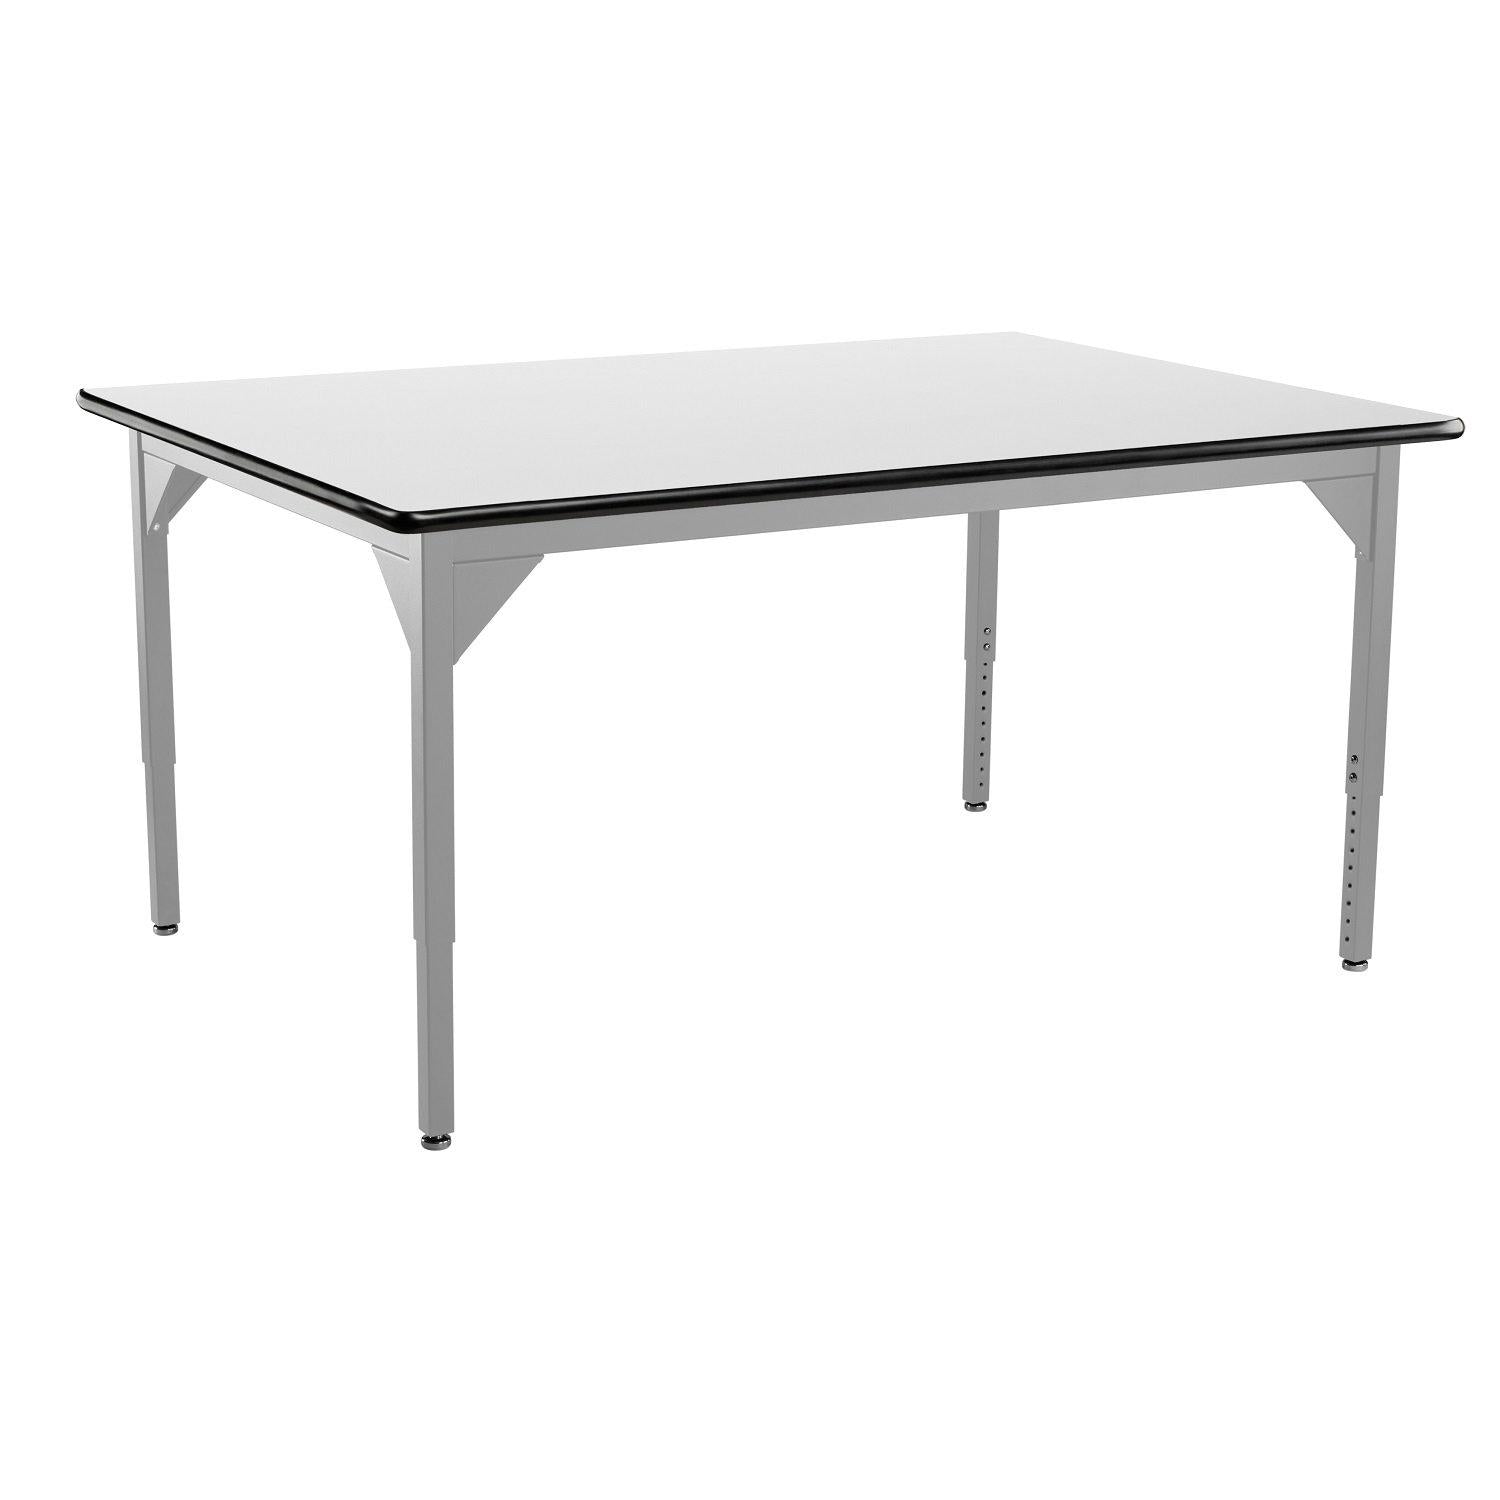 Heavy-Duty Height-Adjustable Utility Table, Soft Grey Frame, 42" x 42", Whiteboard High-Pressure Laminate Top